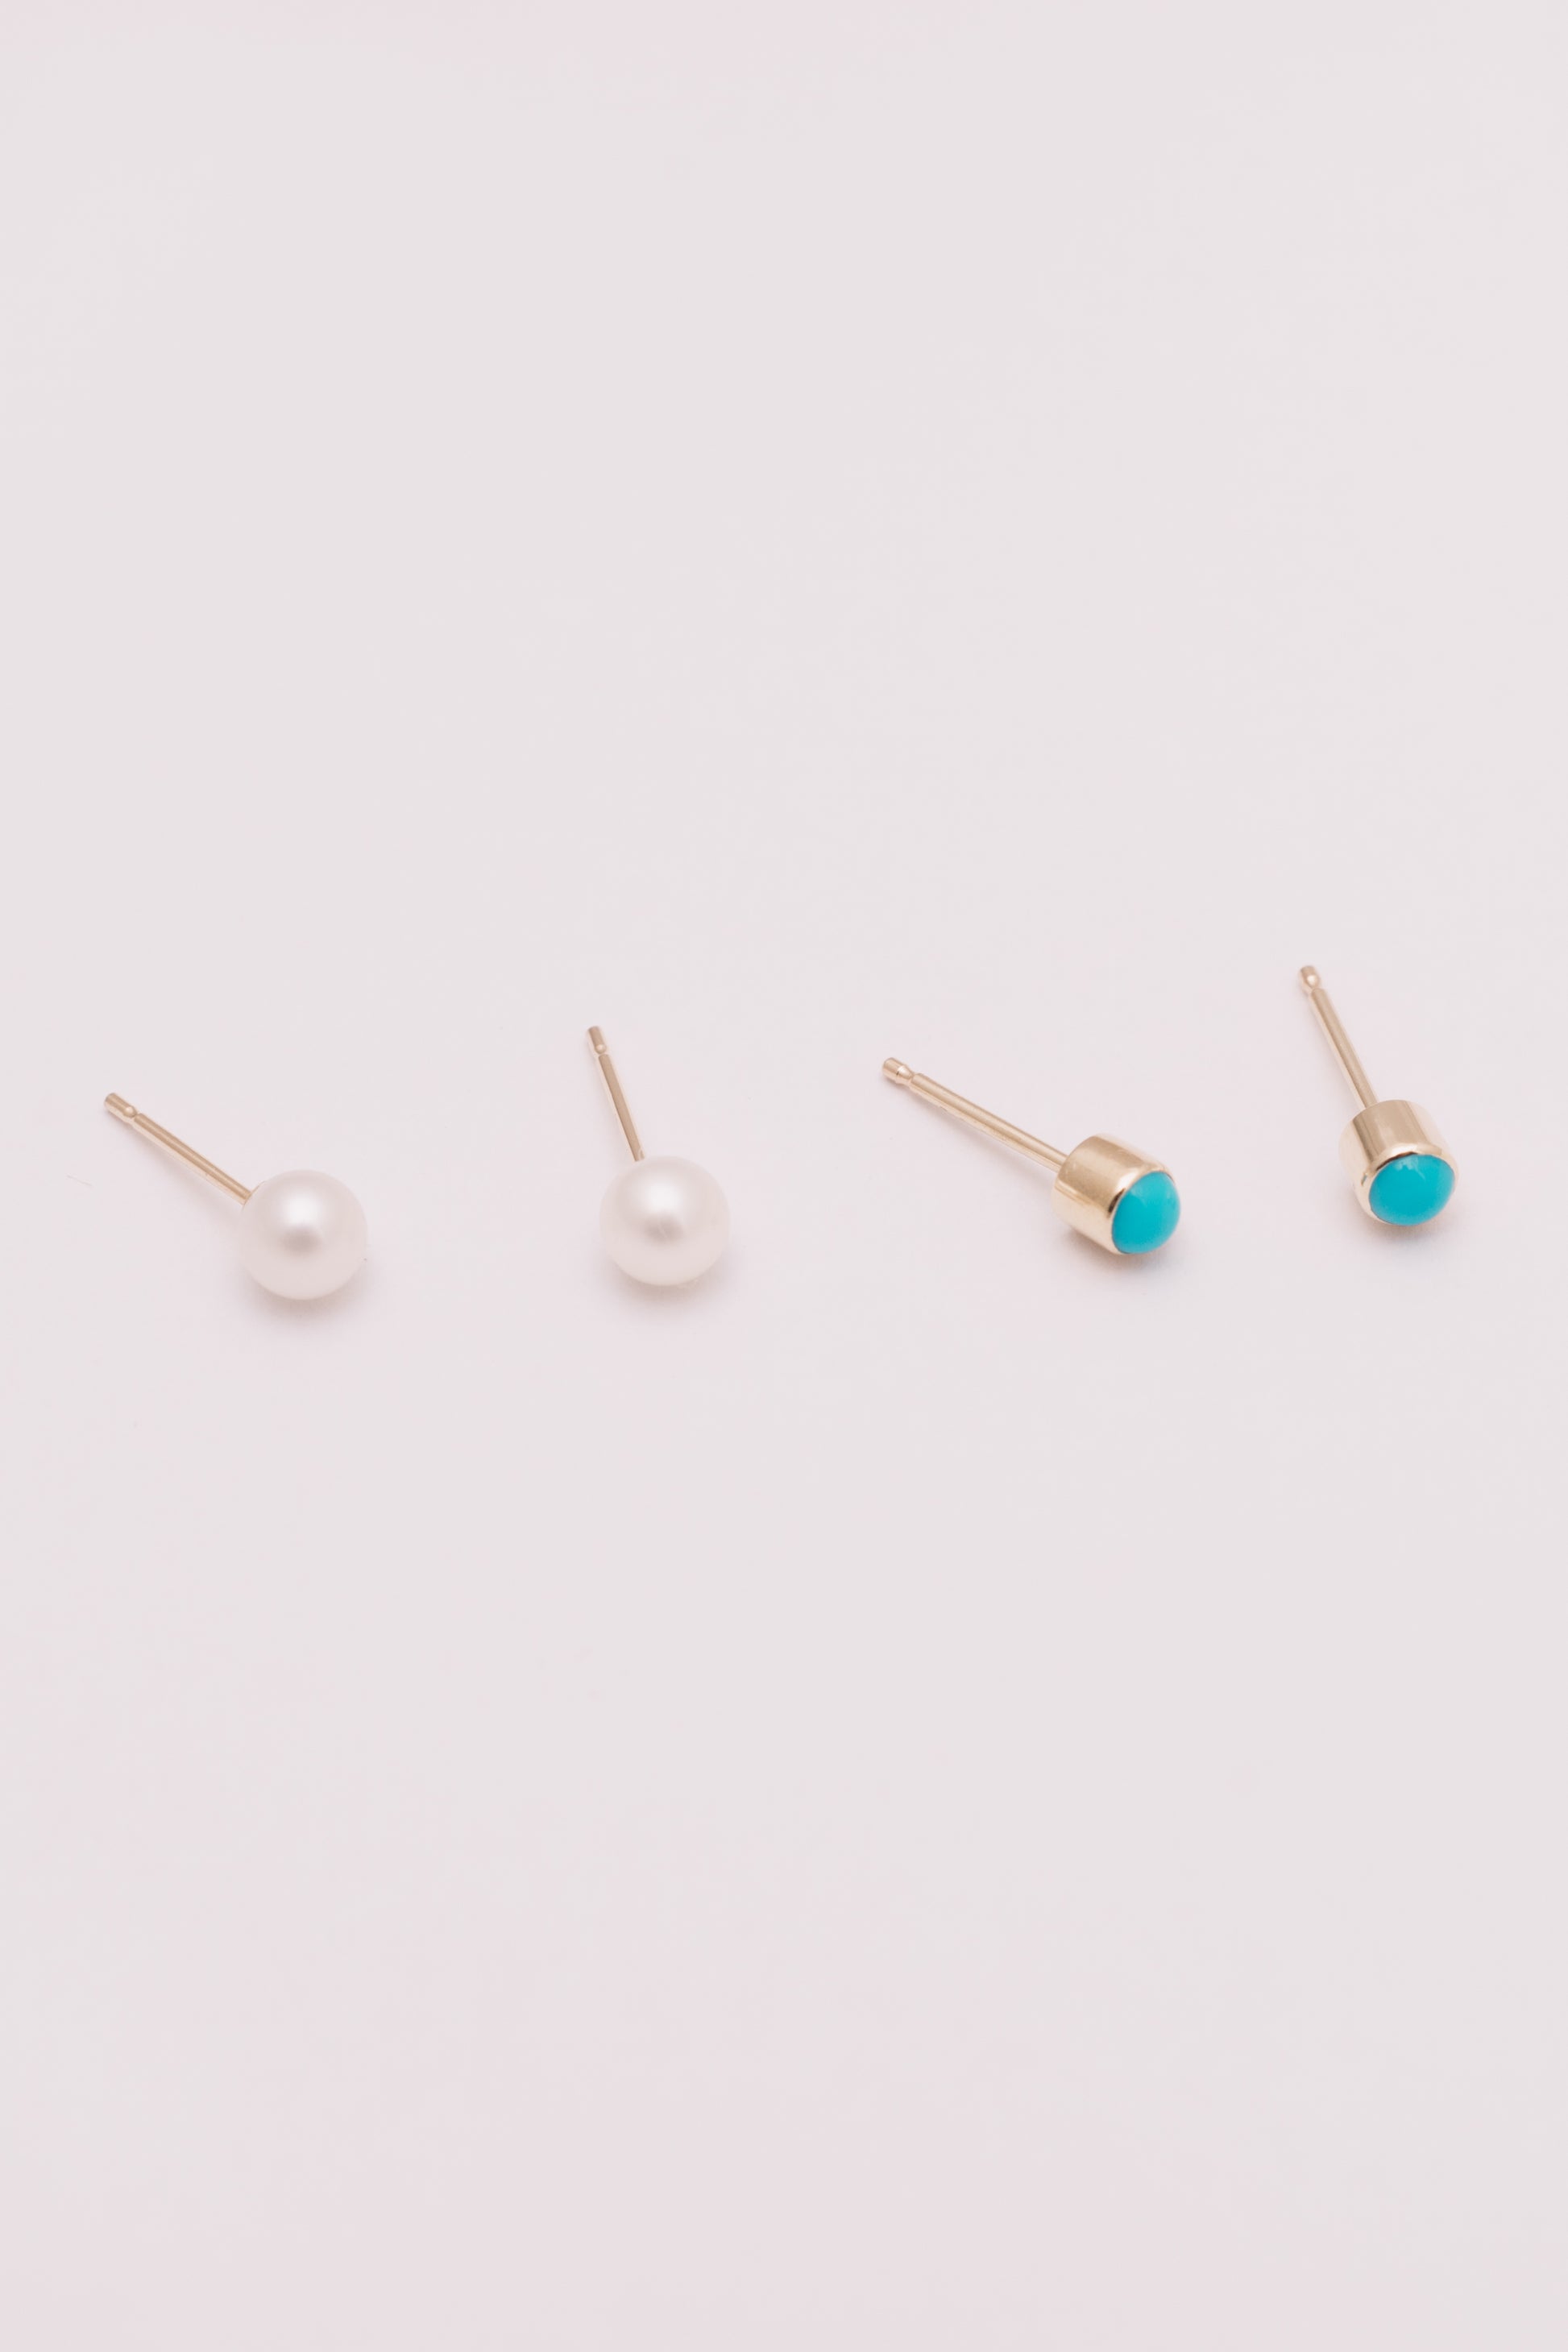 tiny pearl and turquoise stud earrings in gold side by side on white background